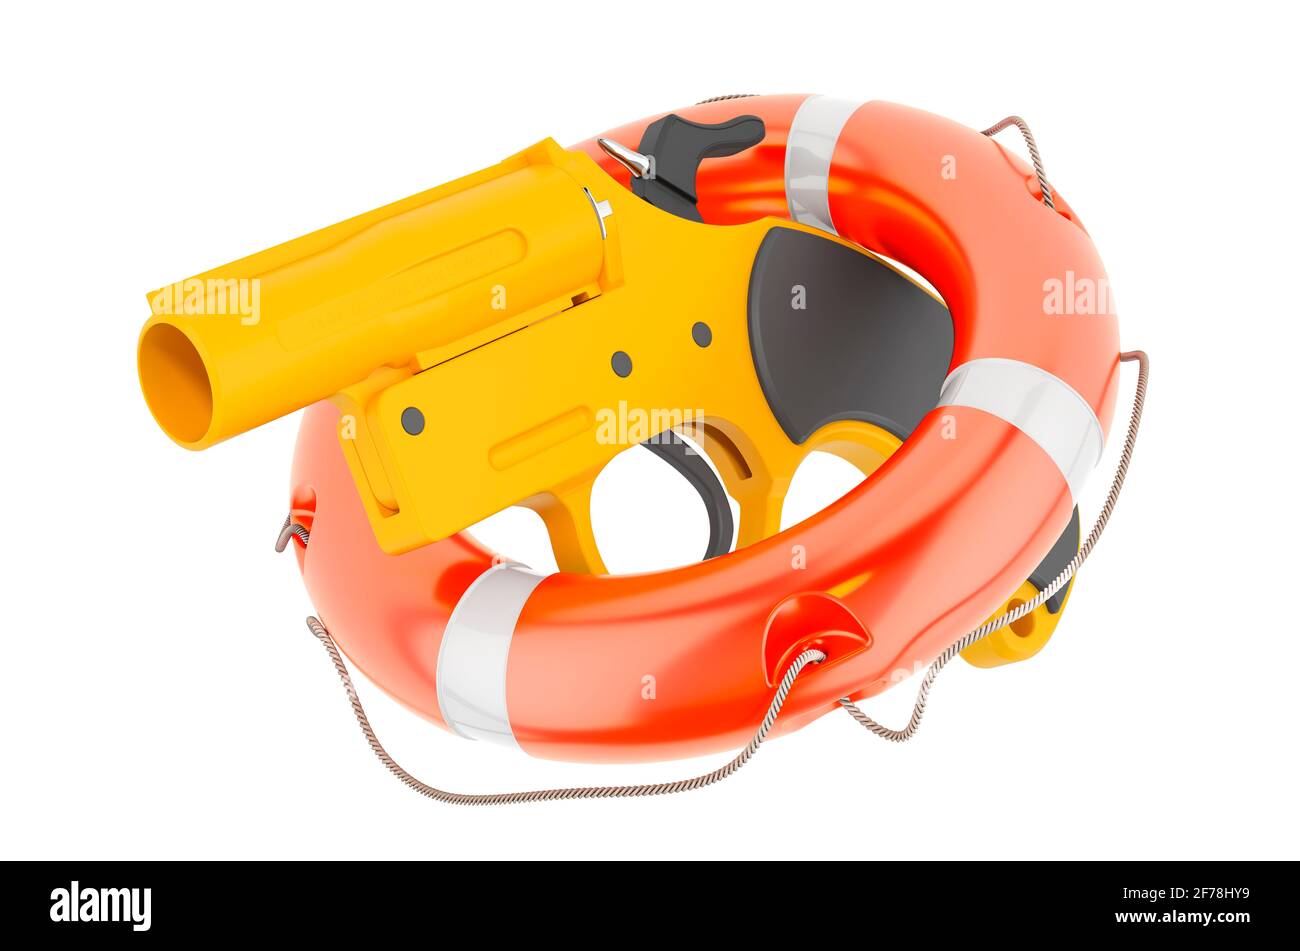 Signal pistol with lifebelt, 3D rendering isolated on white background Stock Photo